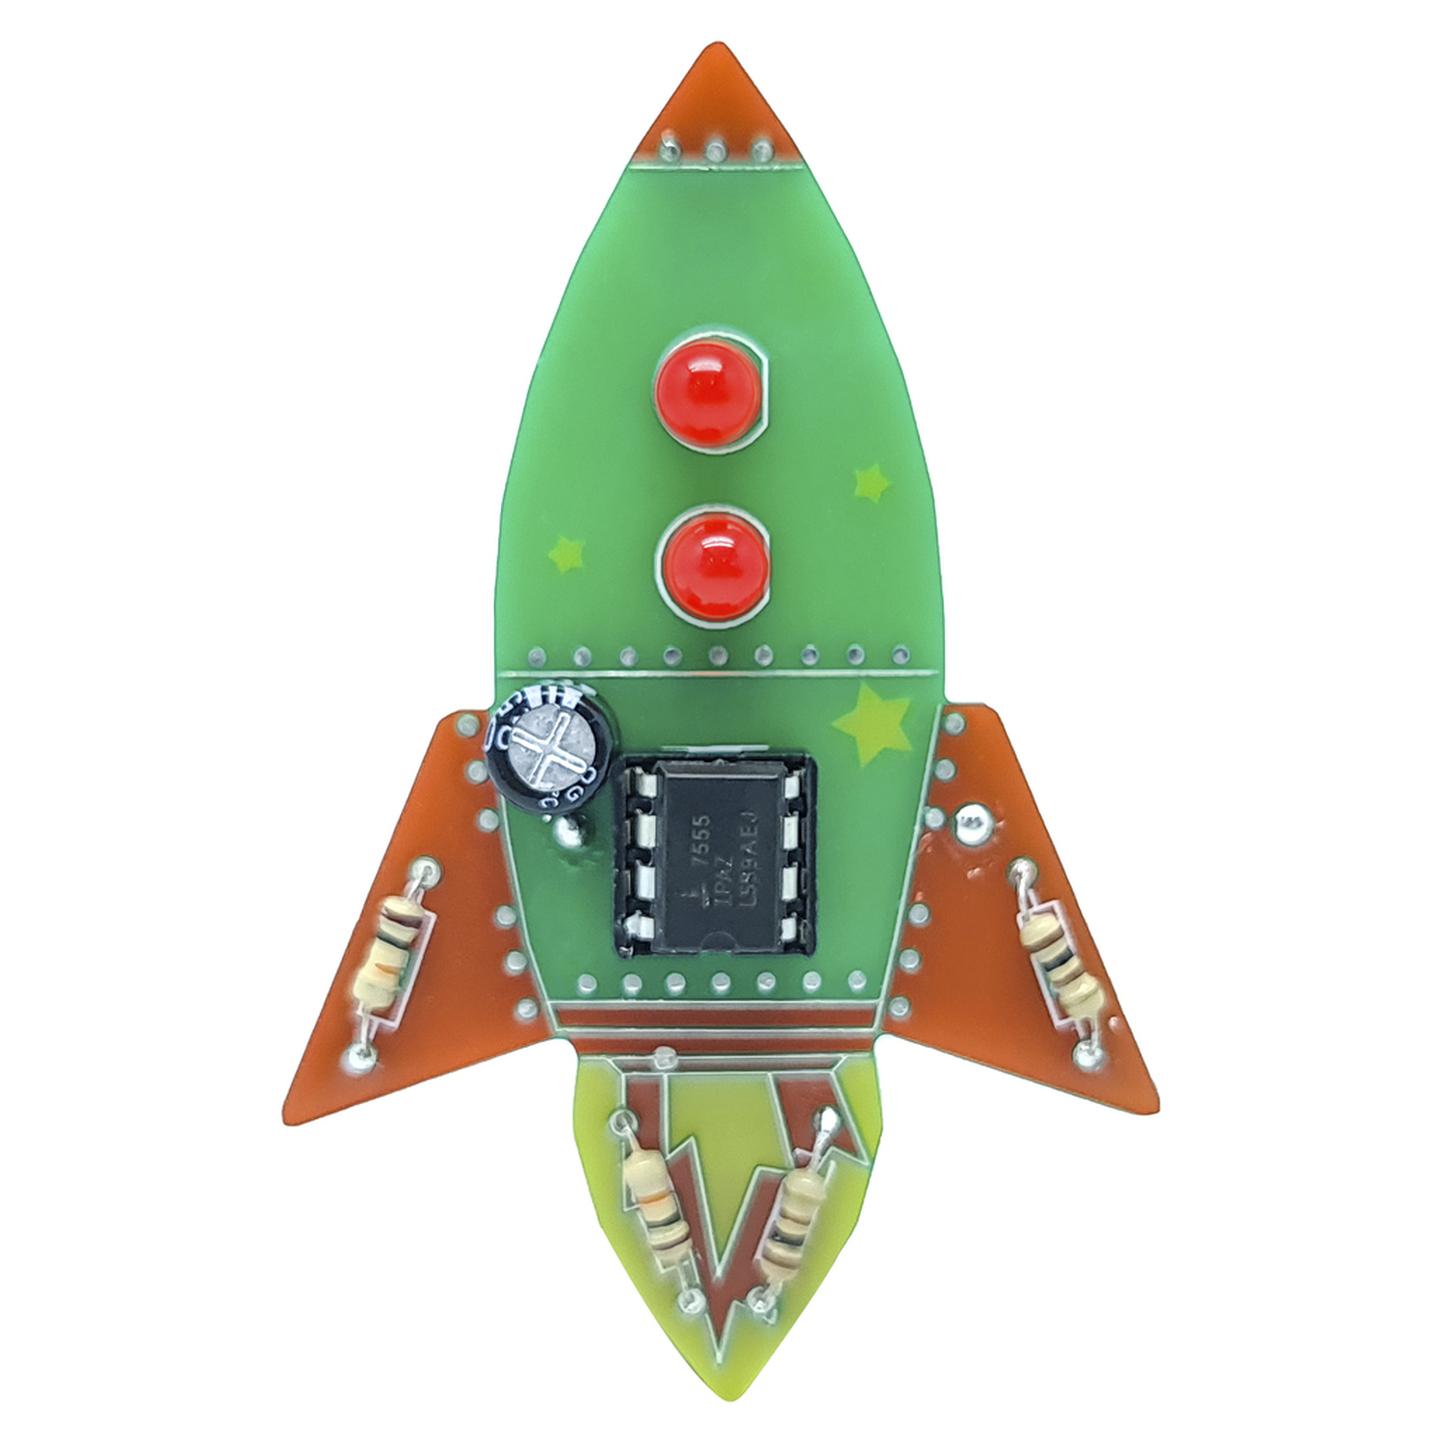 Build a Rocket Badge with Flashing LEDs - Learn to Solder Kit